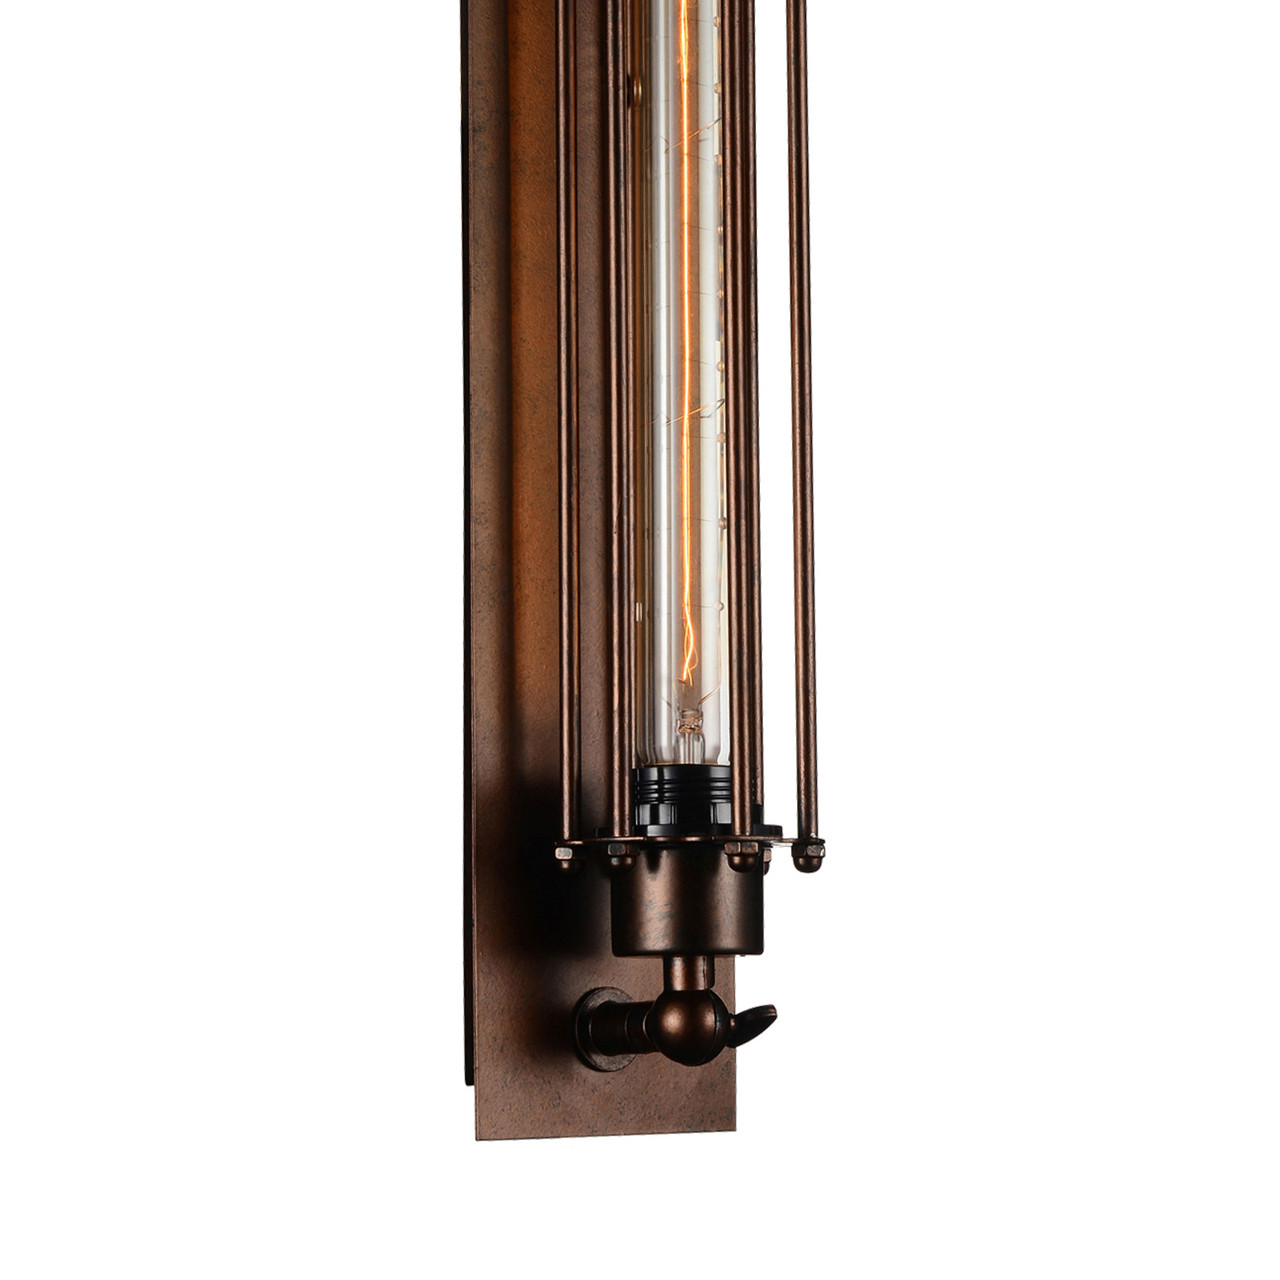 CWI LIGHTING 9613W4-1-126 1 Light Wall Sconce with Chocolate finish